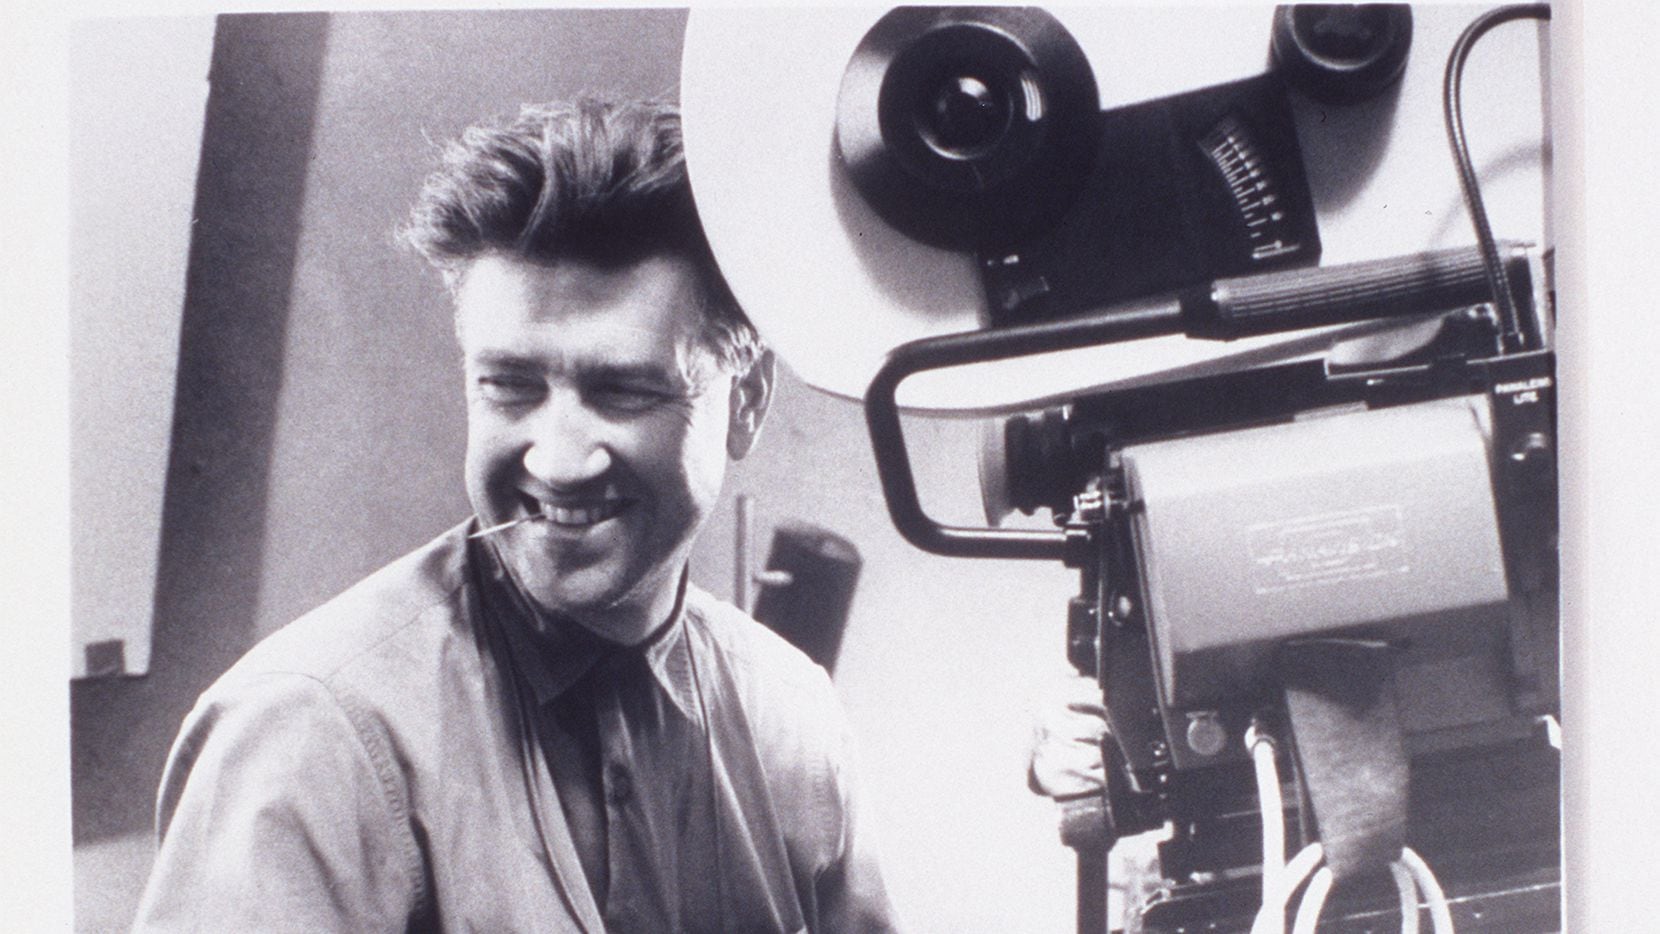 Filmmaker David Lynch shooting on the set of his 1990 film 'Wild at Heart'